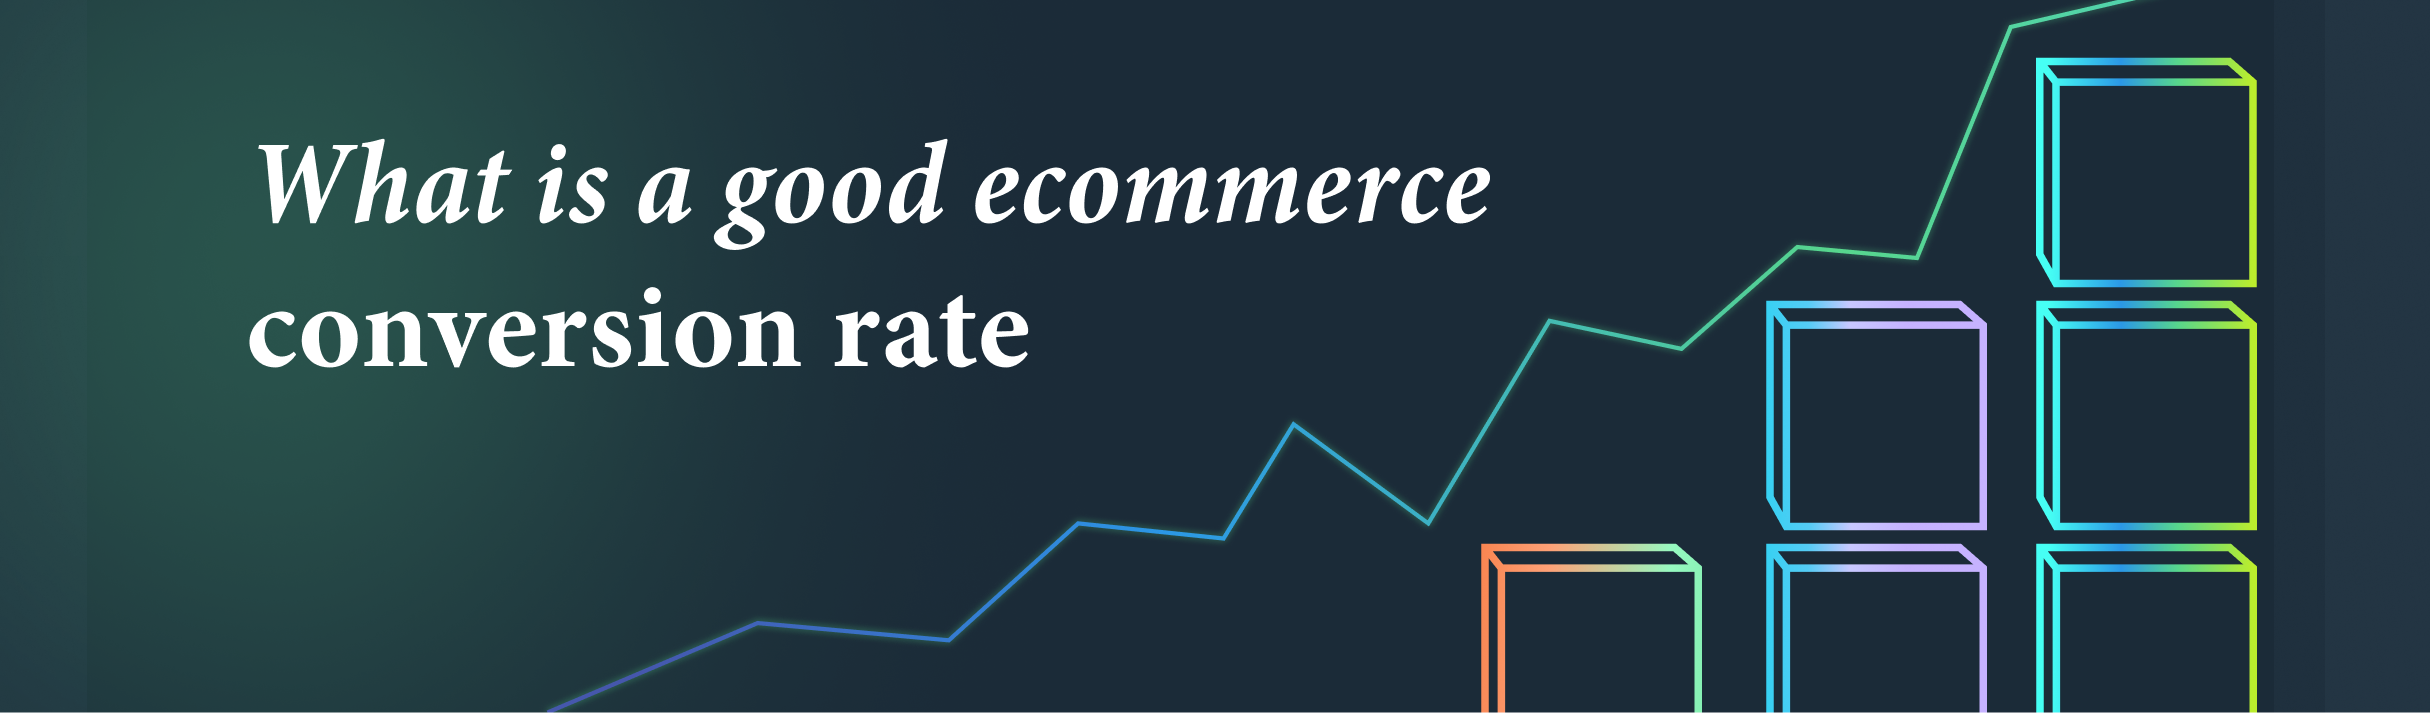 What is a good eCommerce conversion rate